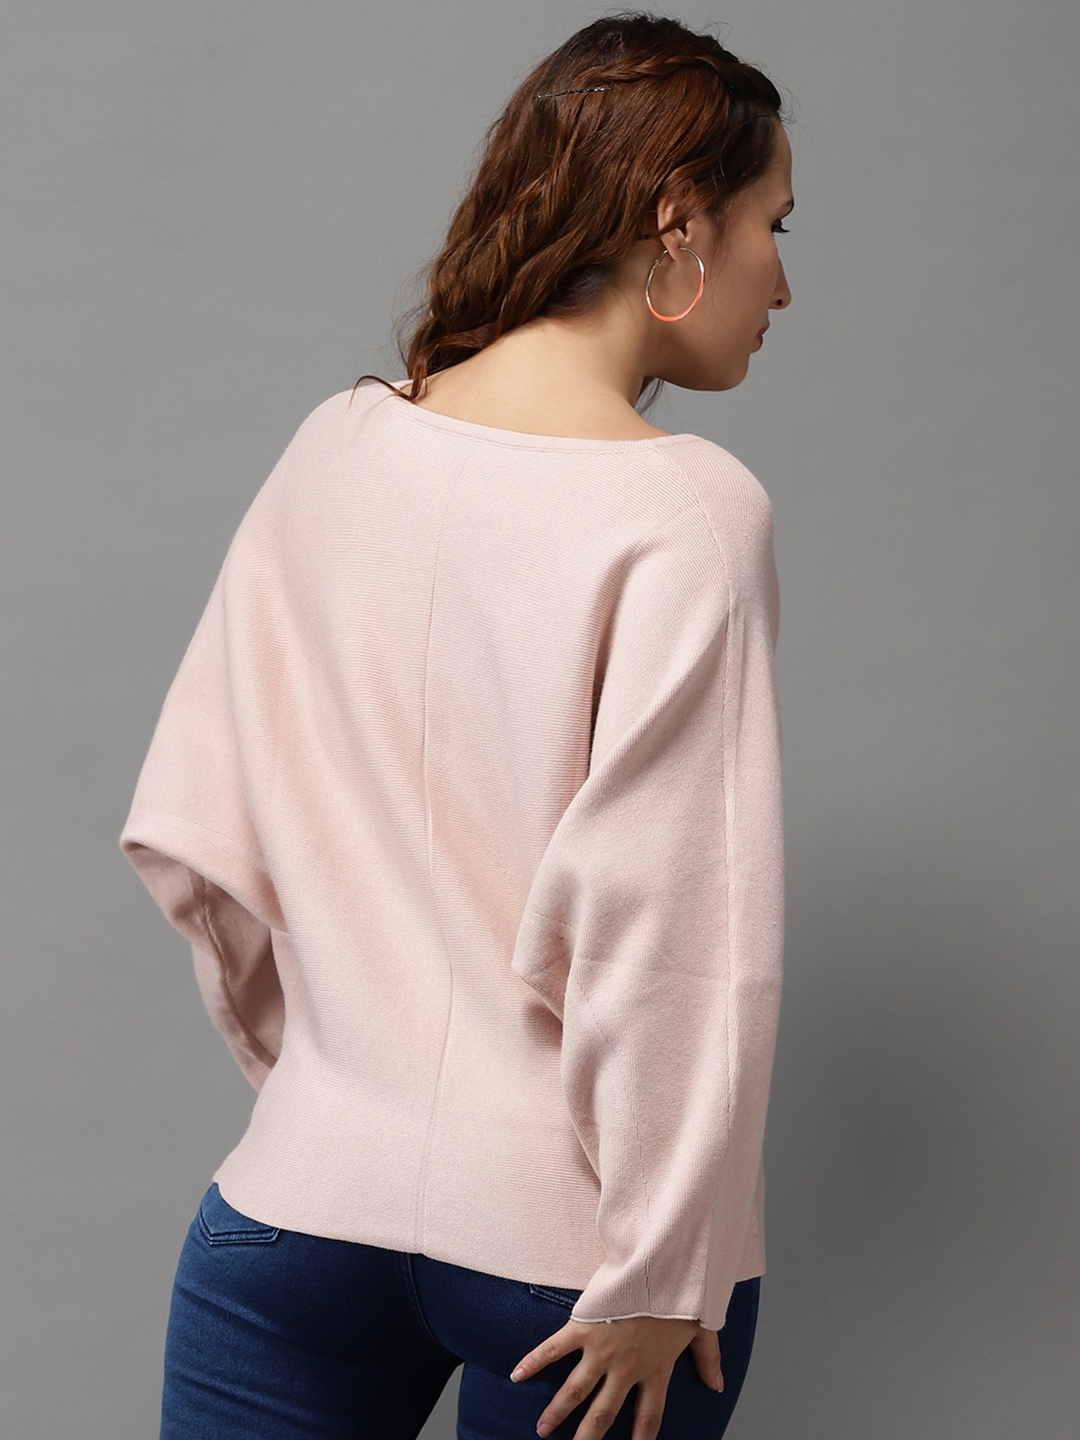 Women's Pink Acrylic Solid Sweaters